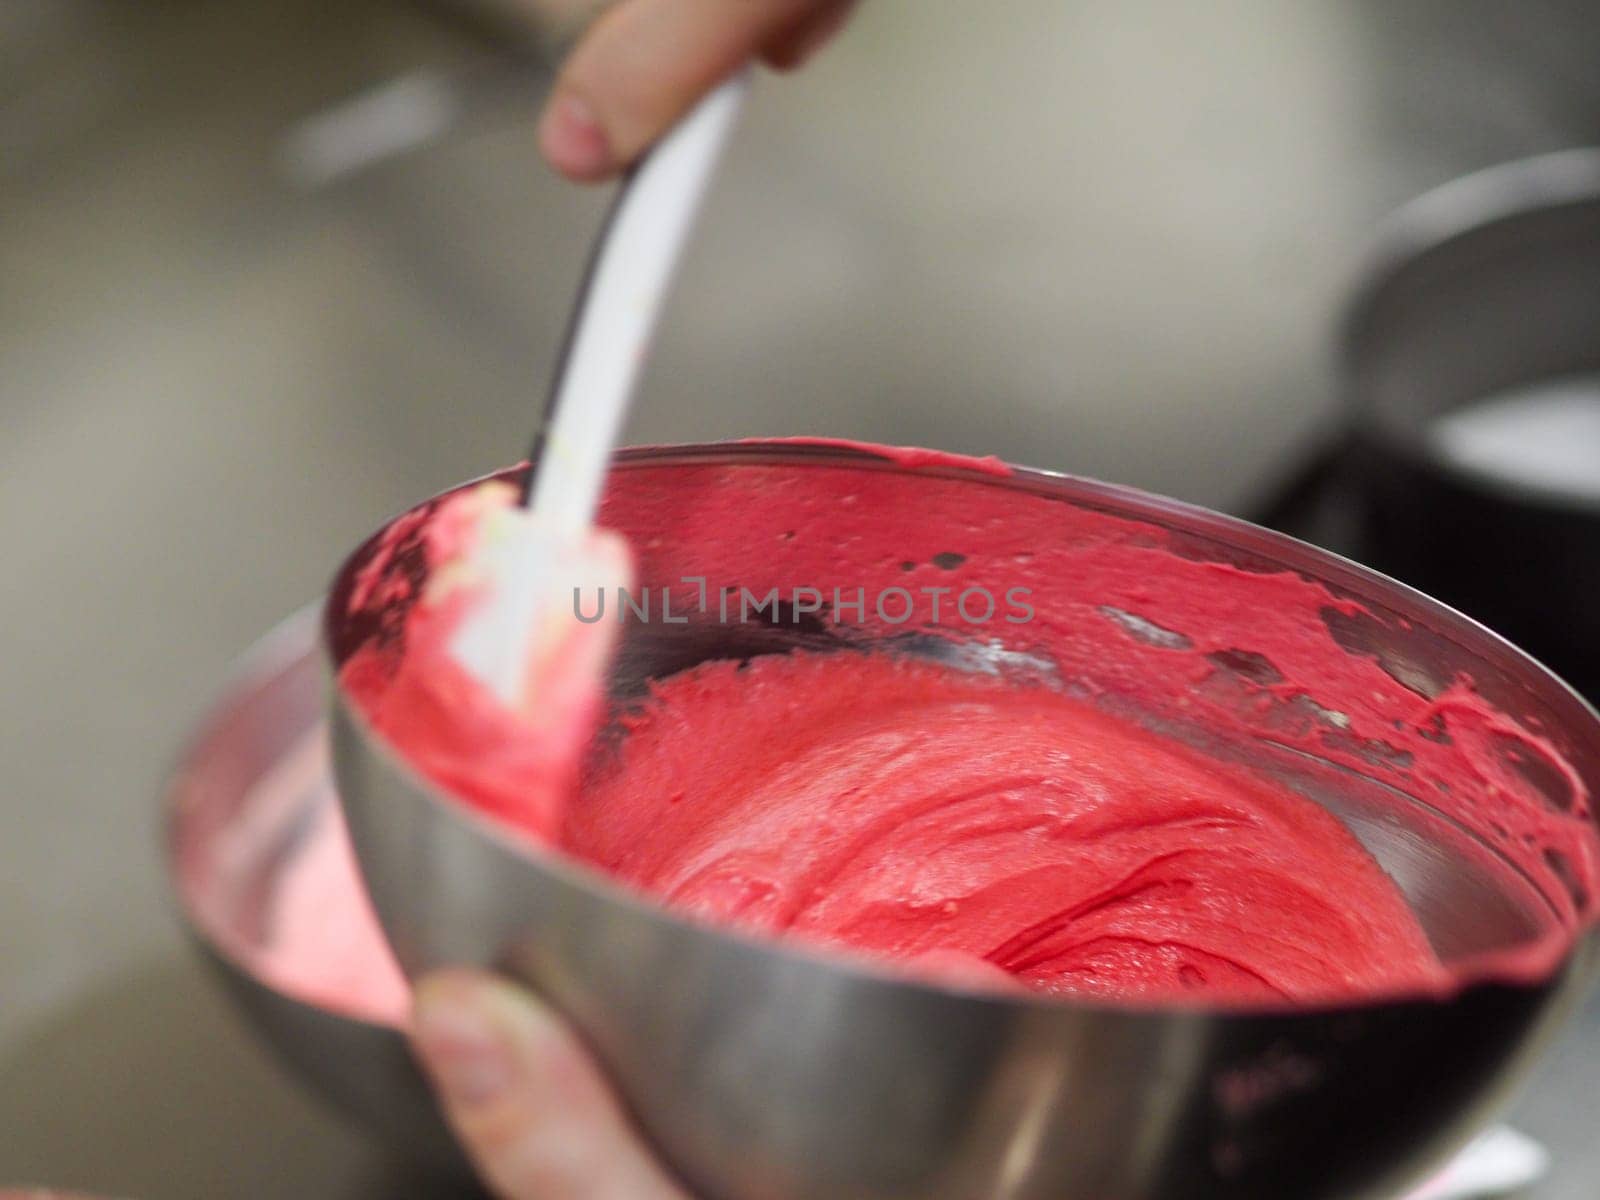 chef preparing white pink red cake creamy mixtures doughs to bake in the oven